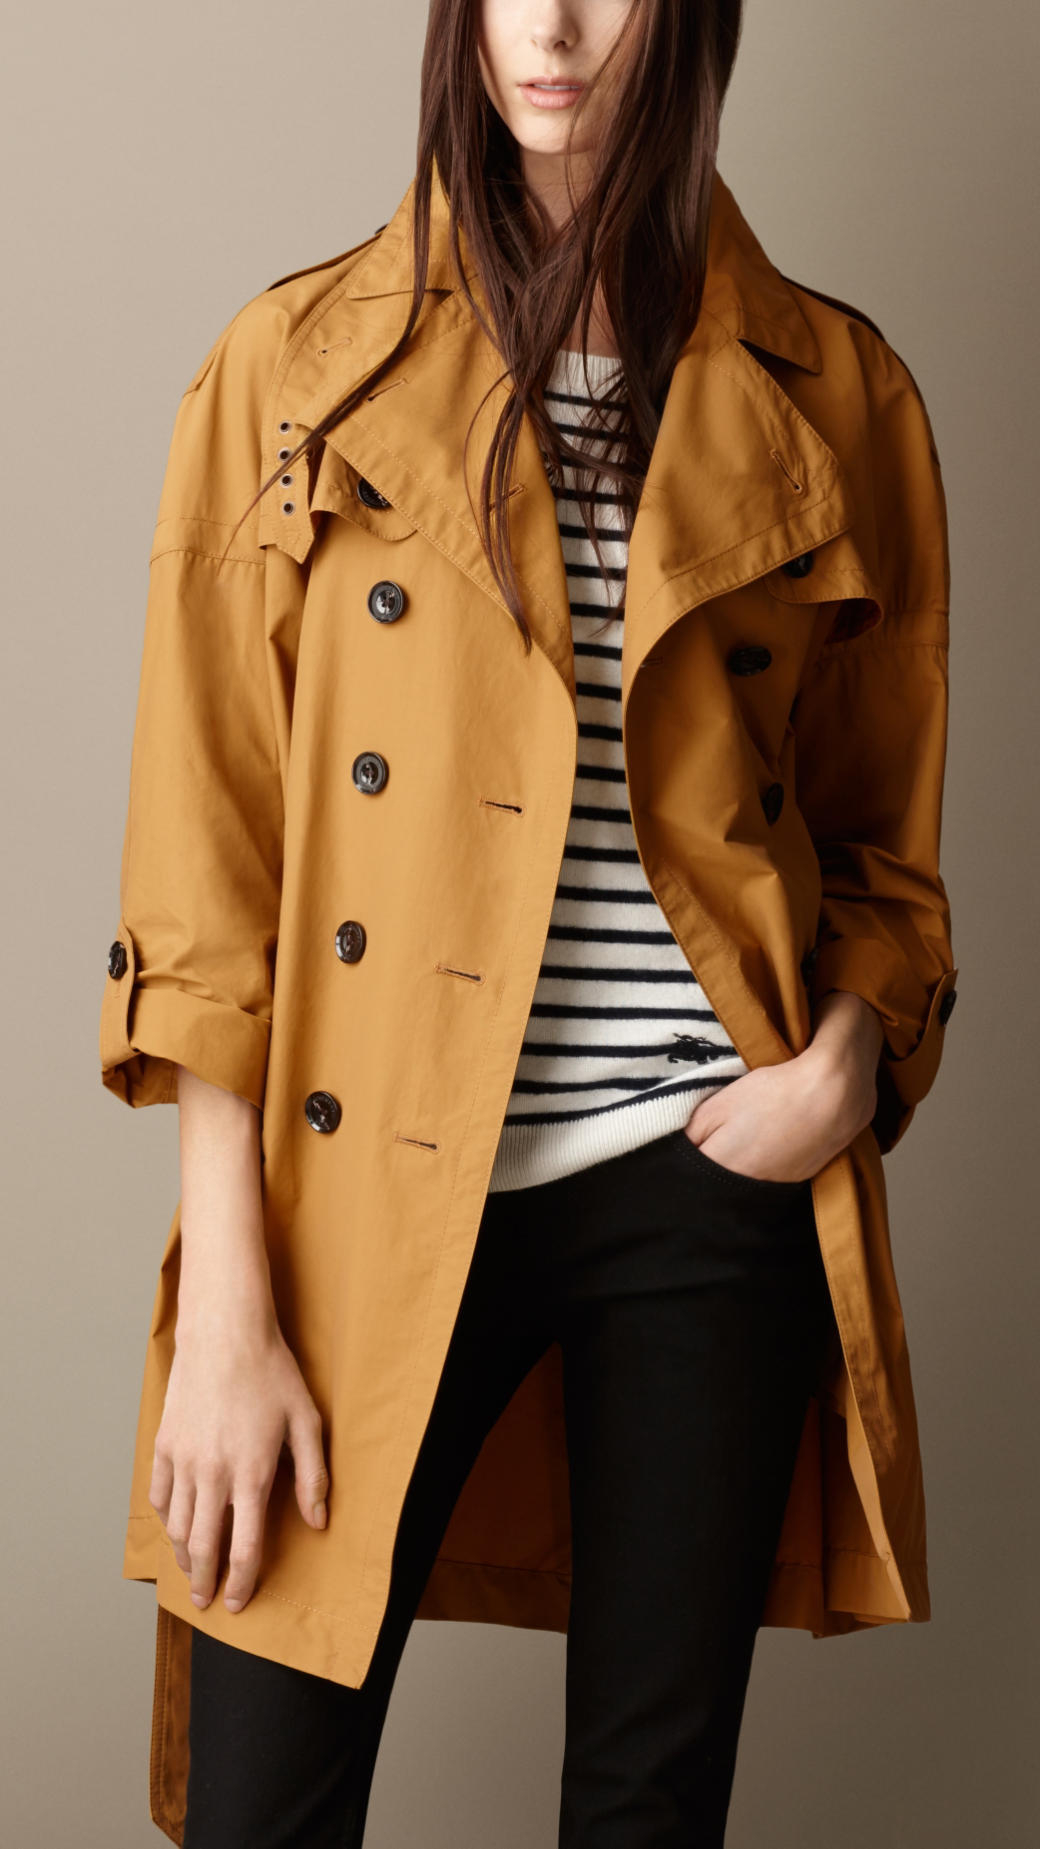 Lyst - Burberry Long Dolman Sleeve Trench Coat in Yellow